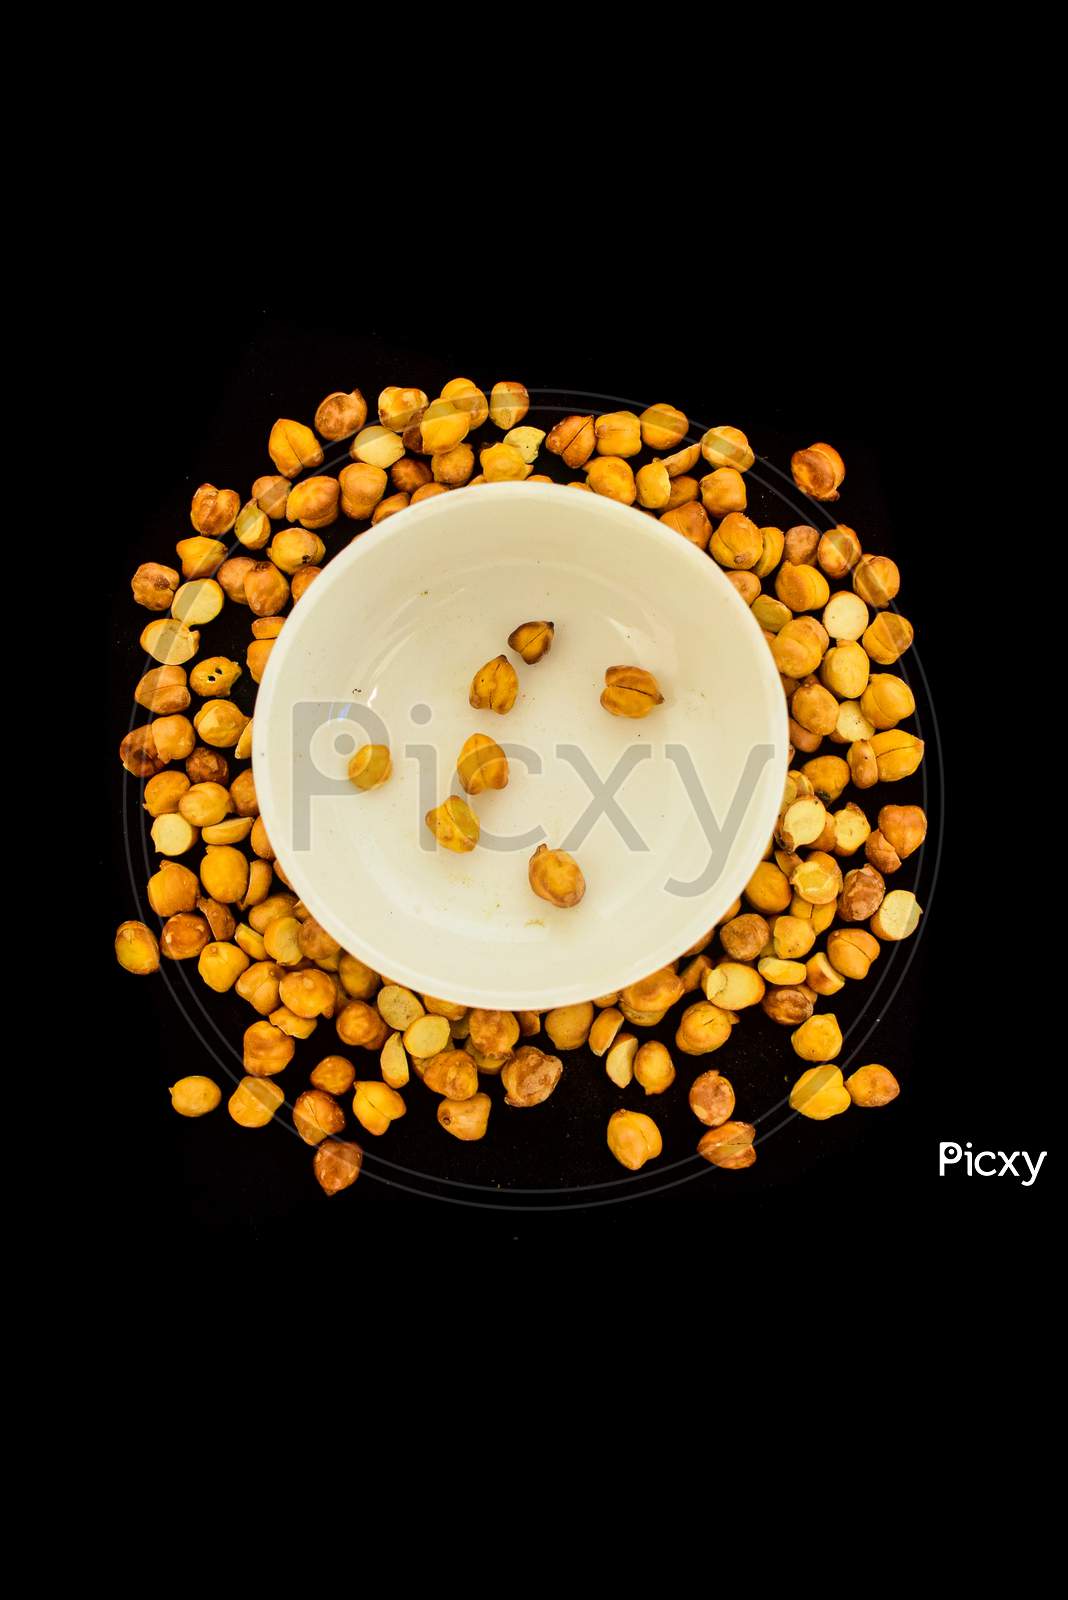 Yellow Food and White small Bowl